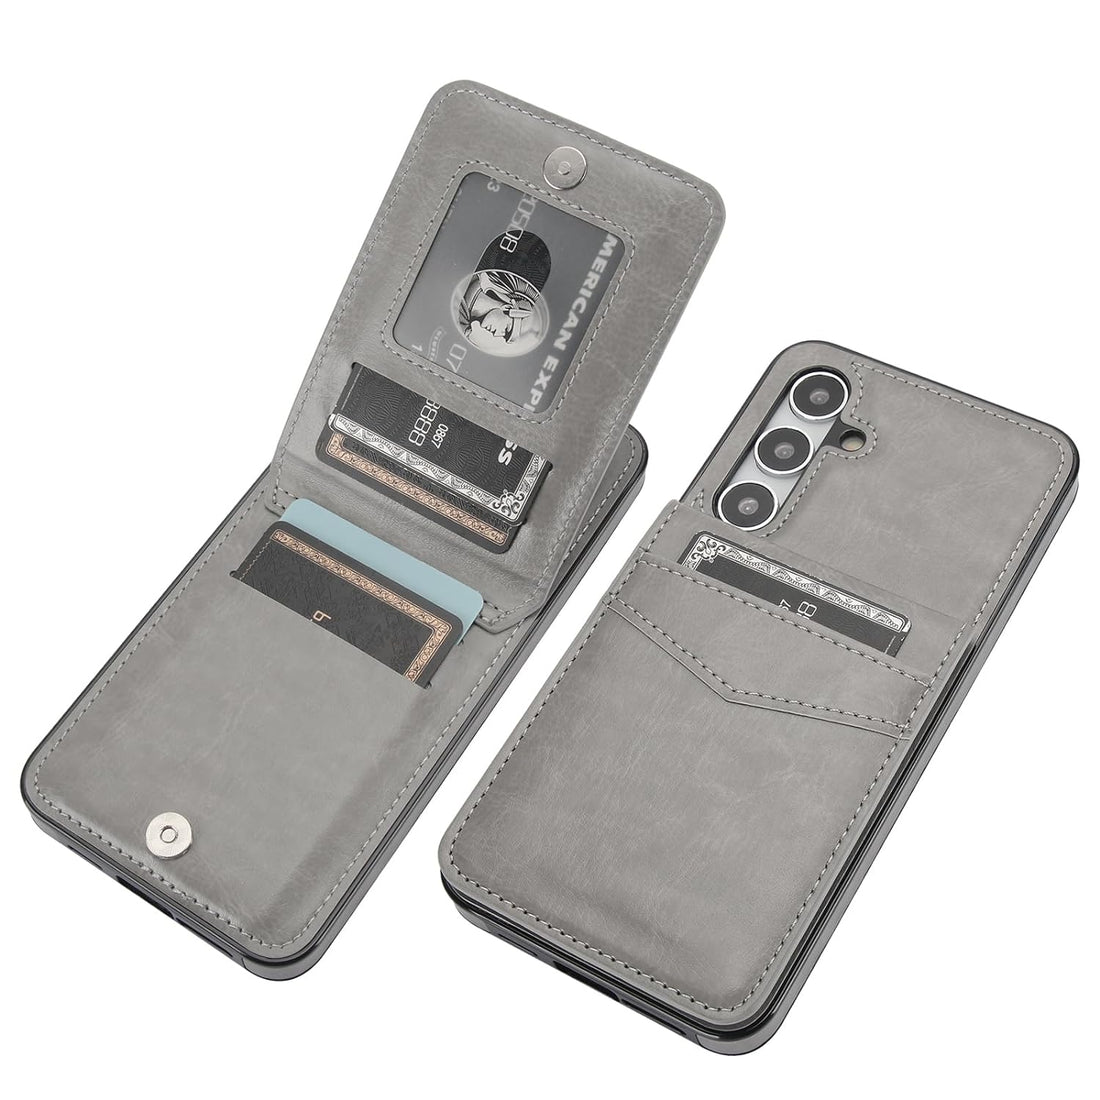 KIHUWEY for Samsung Galaxy S24 Plus Case Wallet with Credit Card Holder, Flip Premium Leather Magnetic Clasp Kickstand Heavy Duty Protective Cover for Samsung Galaxy S24 Plus 6.7" (Gray)